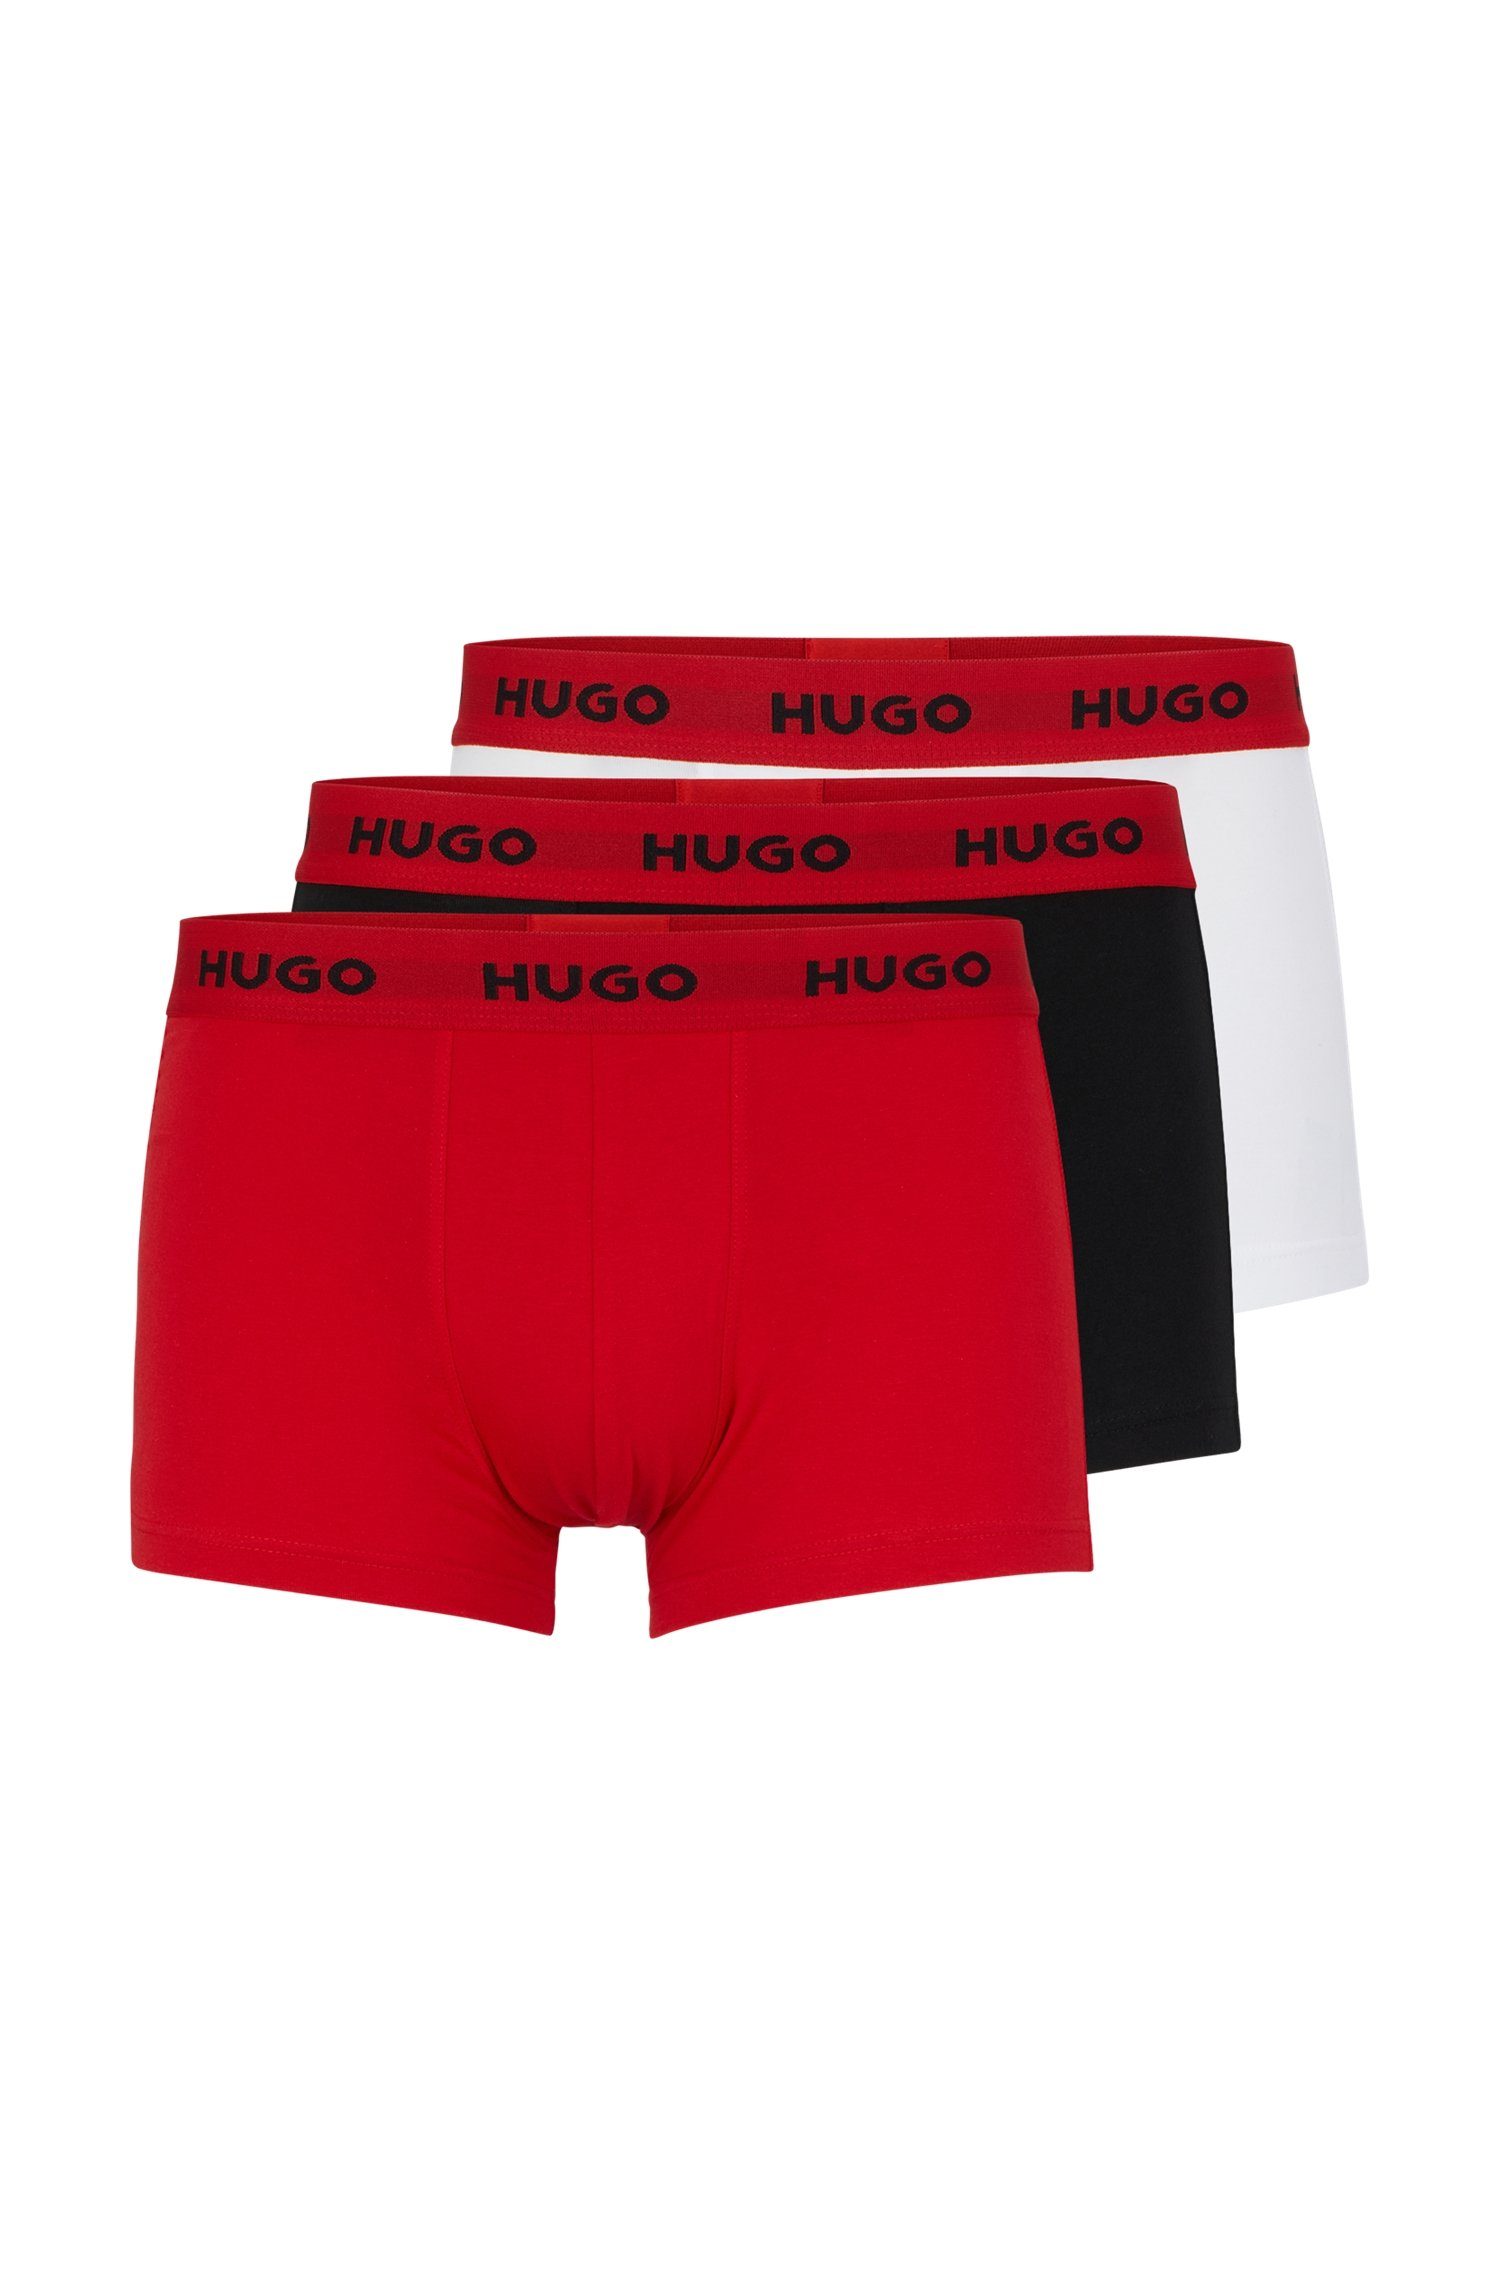 (Packung, 3er TRUNK Pack) TRIPLET Open 972 PACK HUGO Miscellaneous Trunk